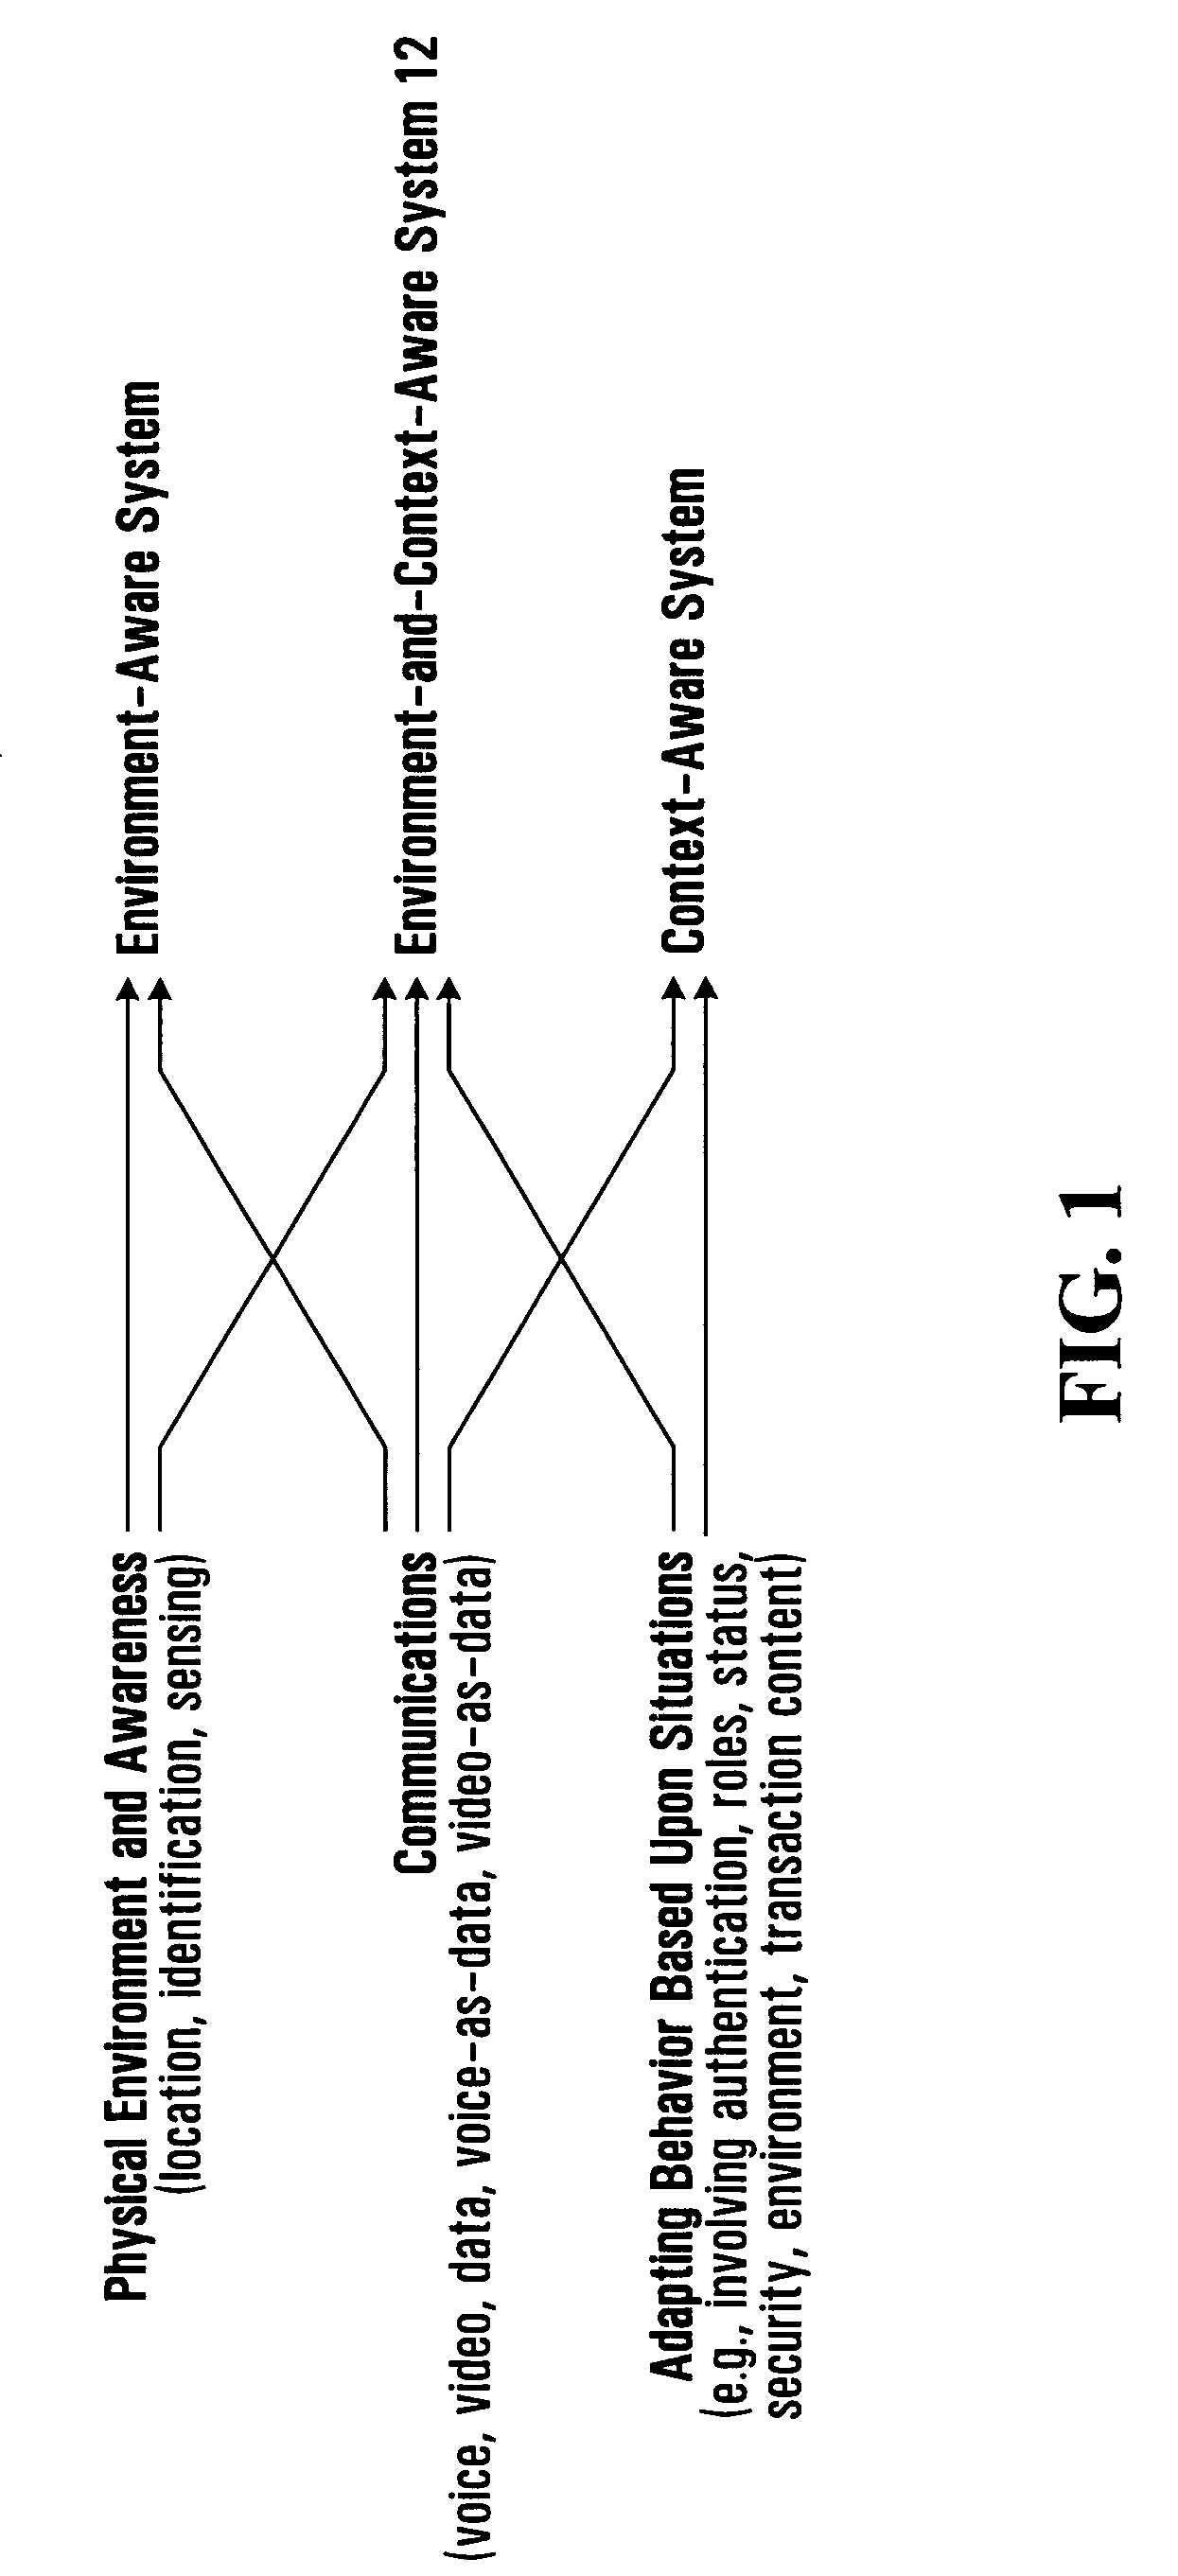 Methods and systems for use in the provision of services in an institutional setting such as a healthcare facility